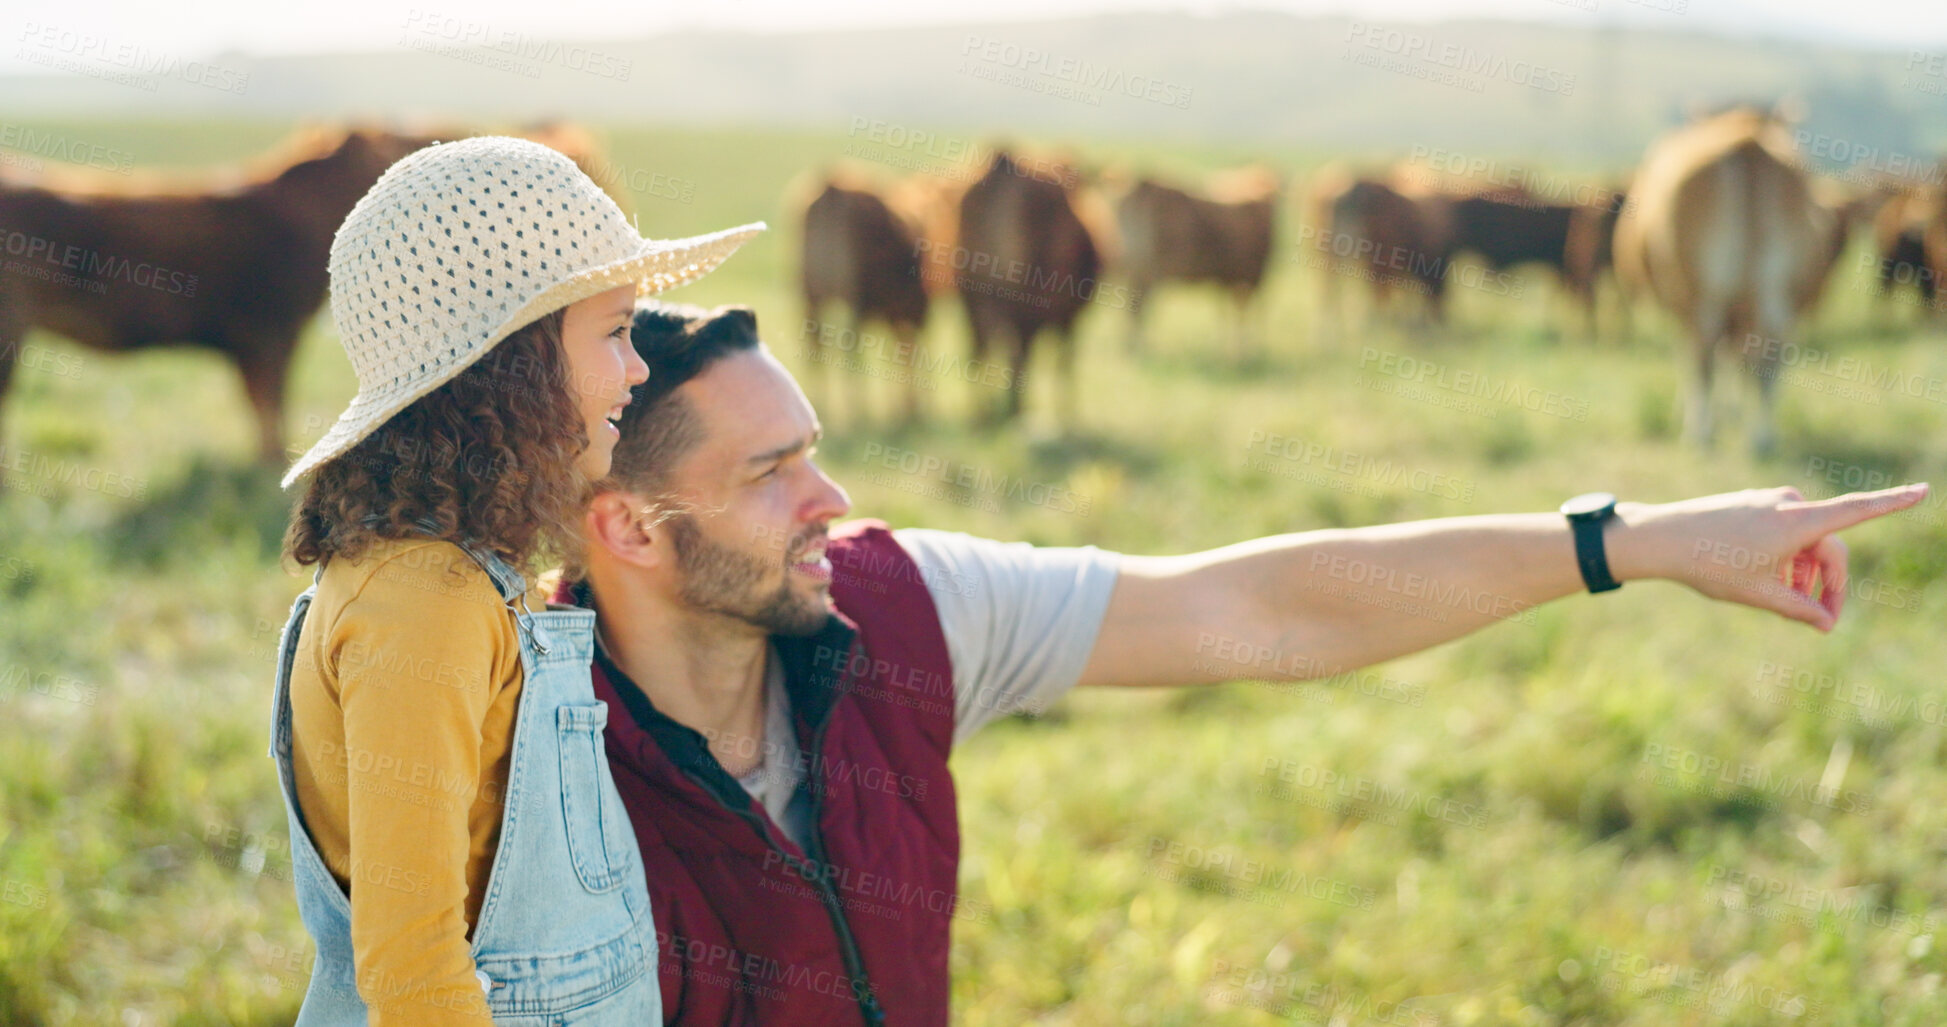 Buy stock photo Cows in field, dad pointing and child in countryside with agriculture, learning and happiness in nature together. Agro family farm, small business and father teaching girl, cattle and view on grass.